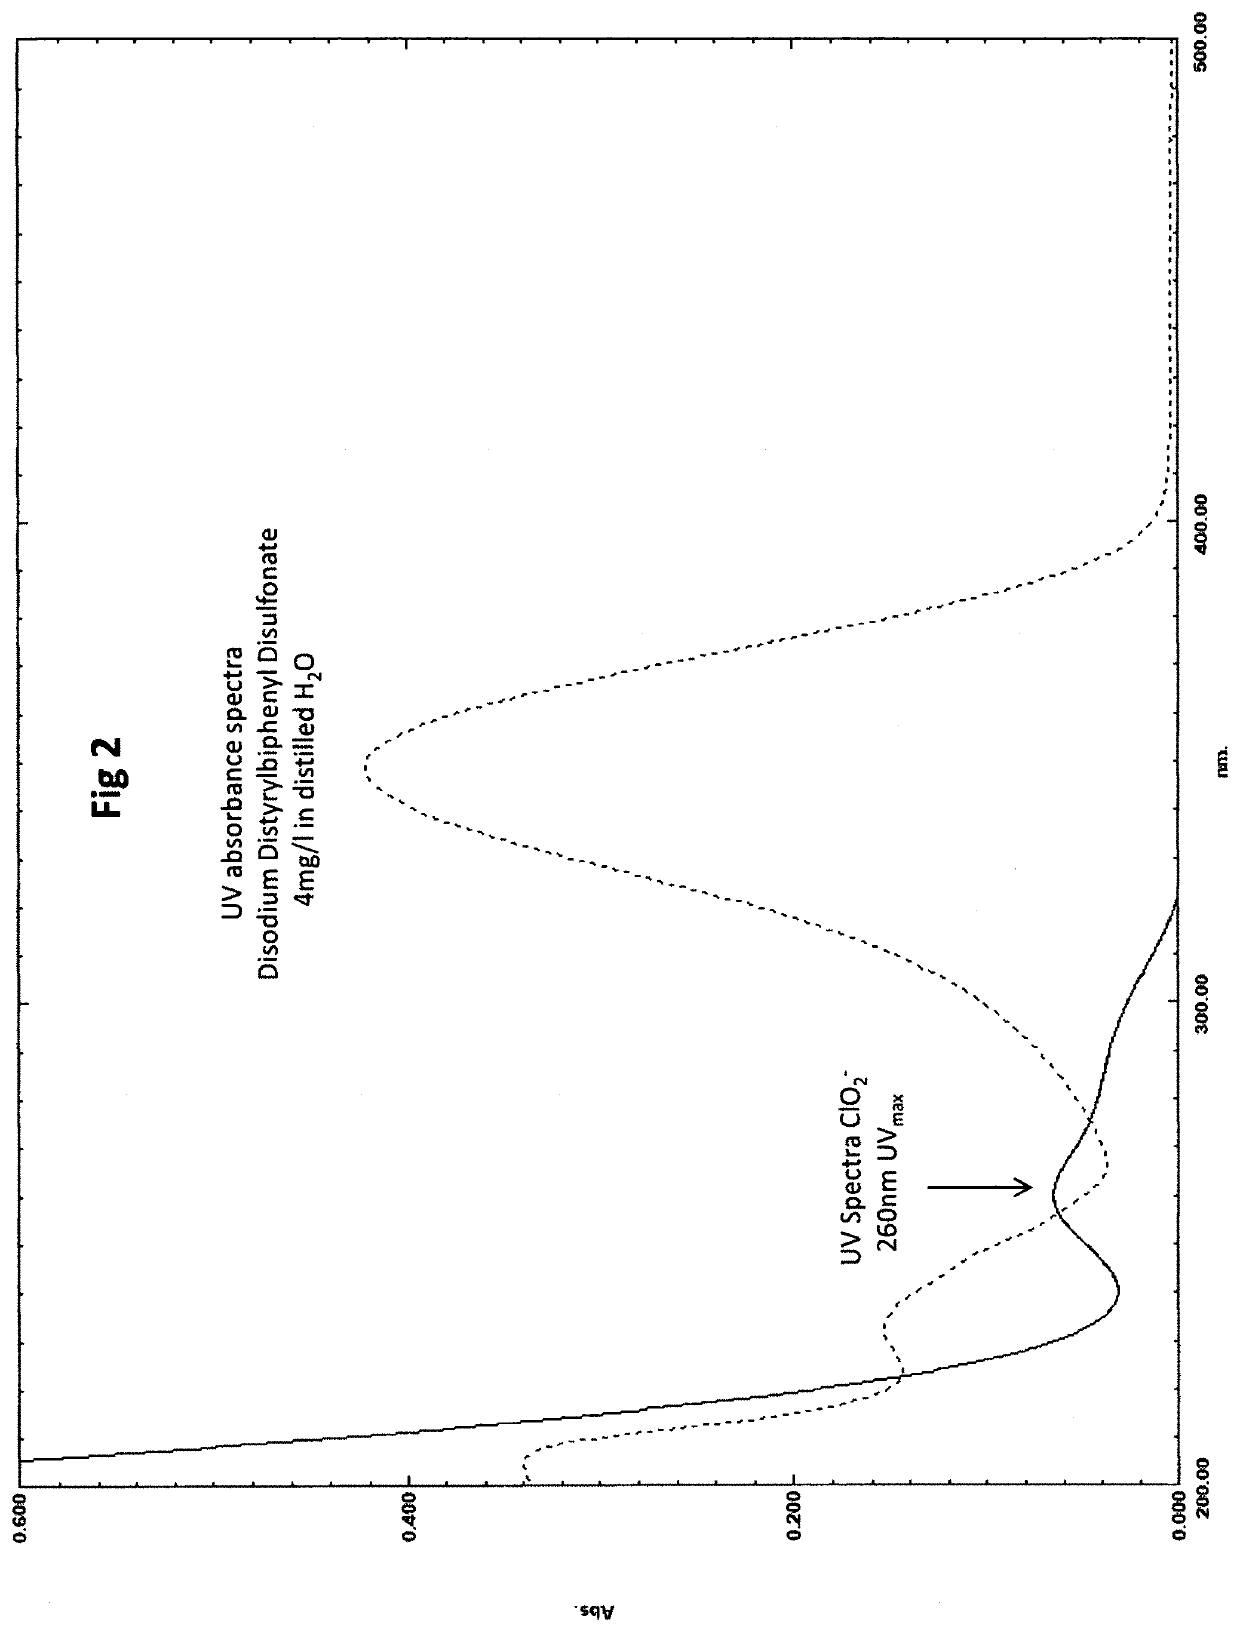 Method for the ultraviolet stabilization of chlorine dioxide in aqueous systems